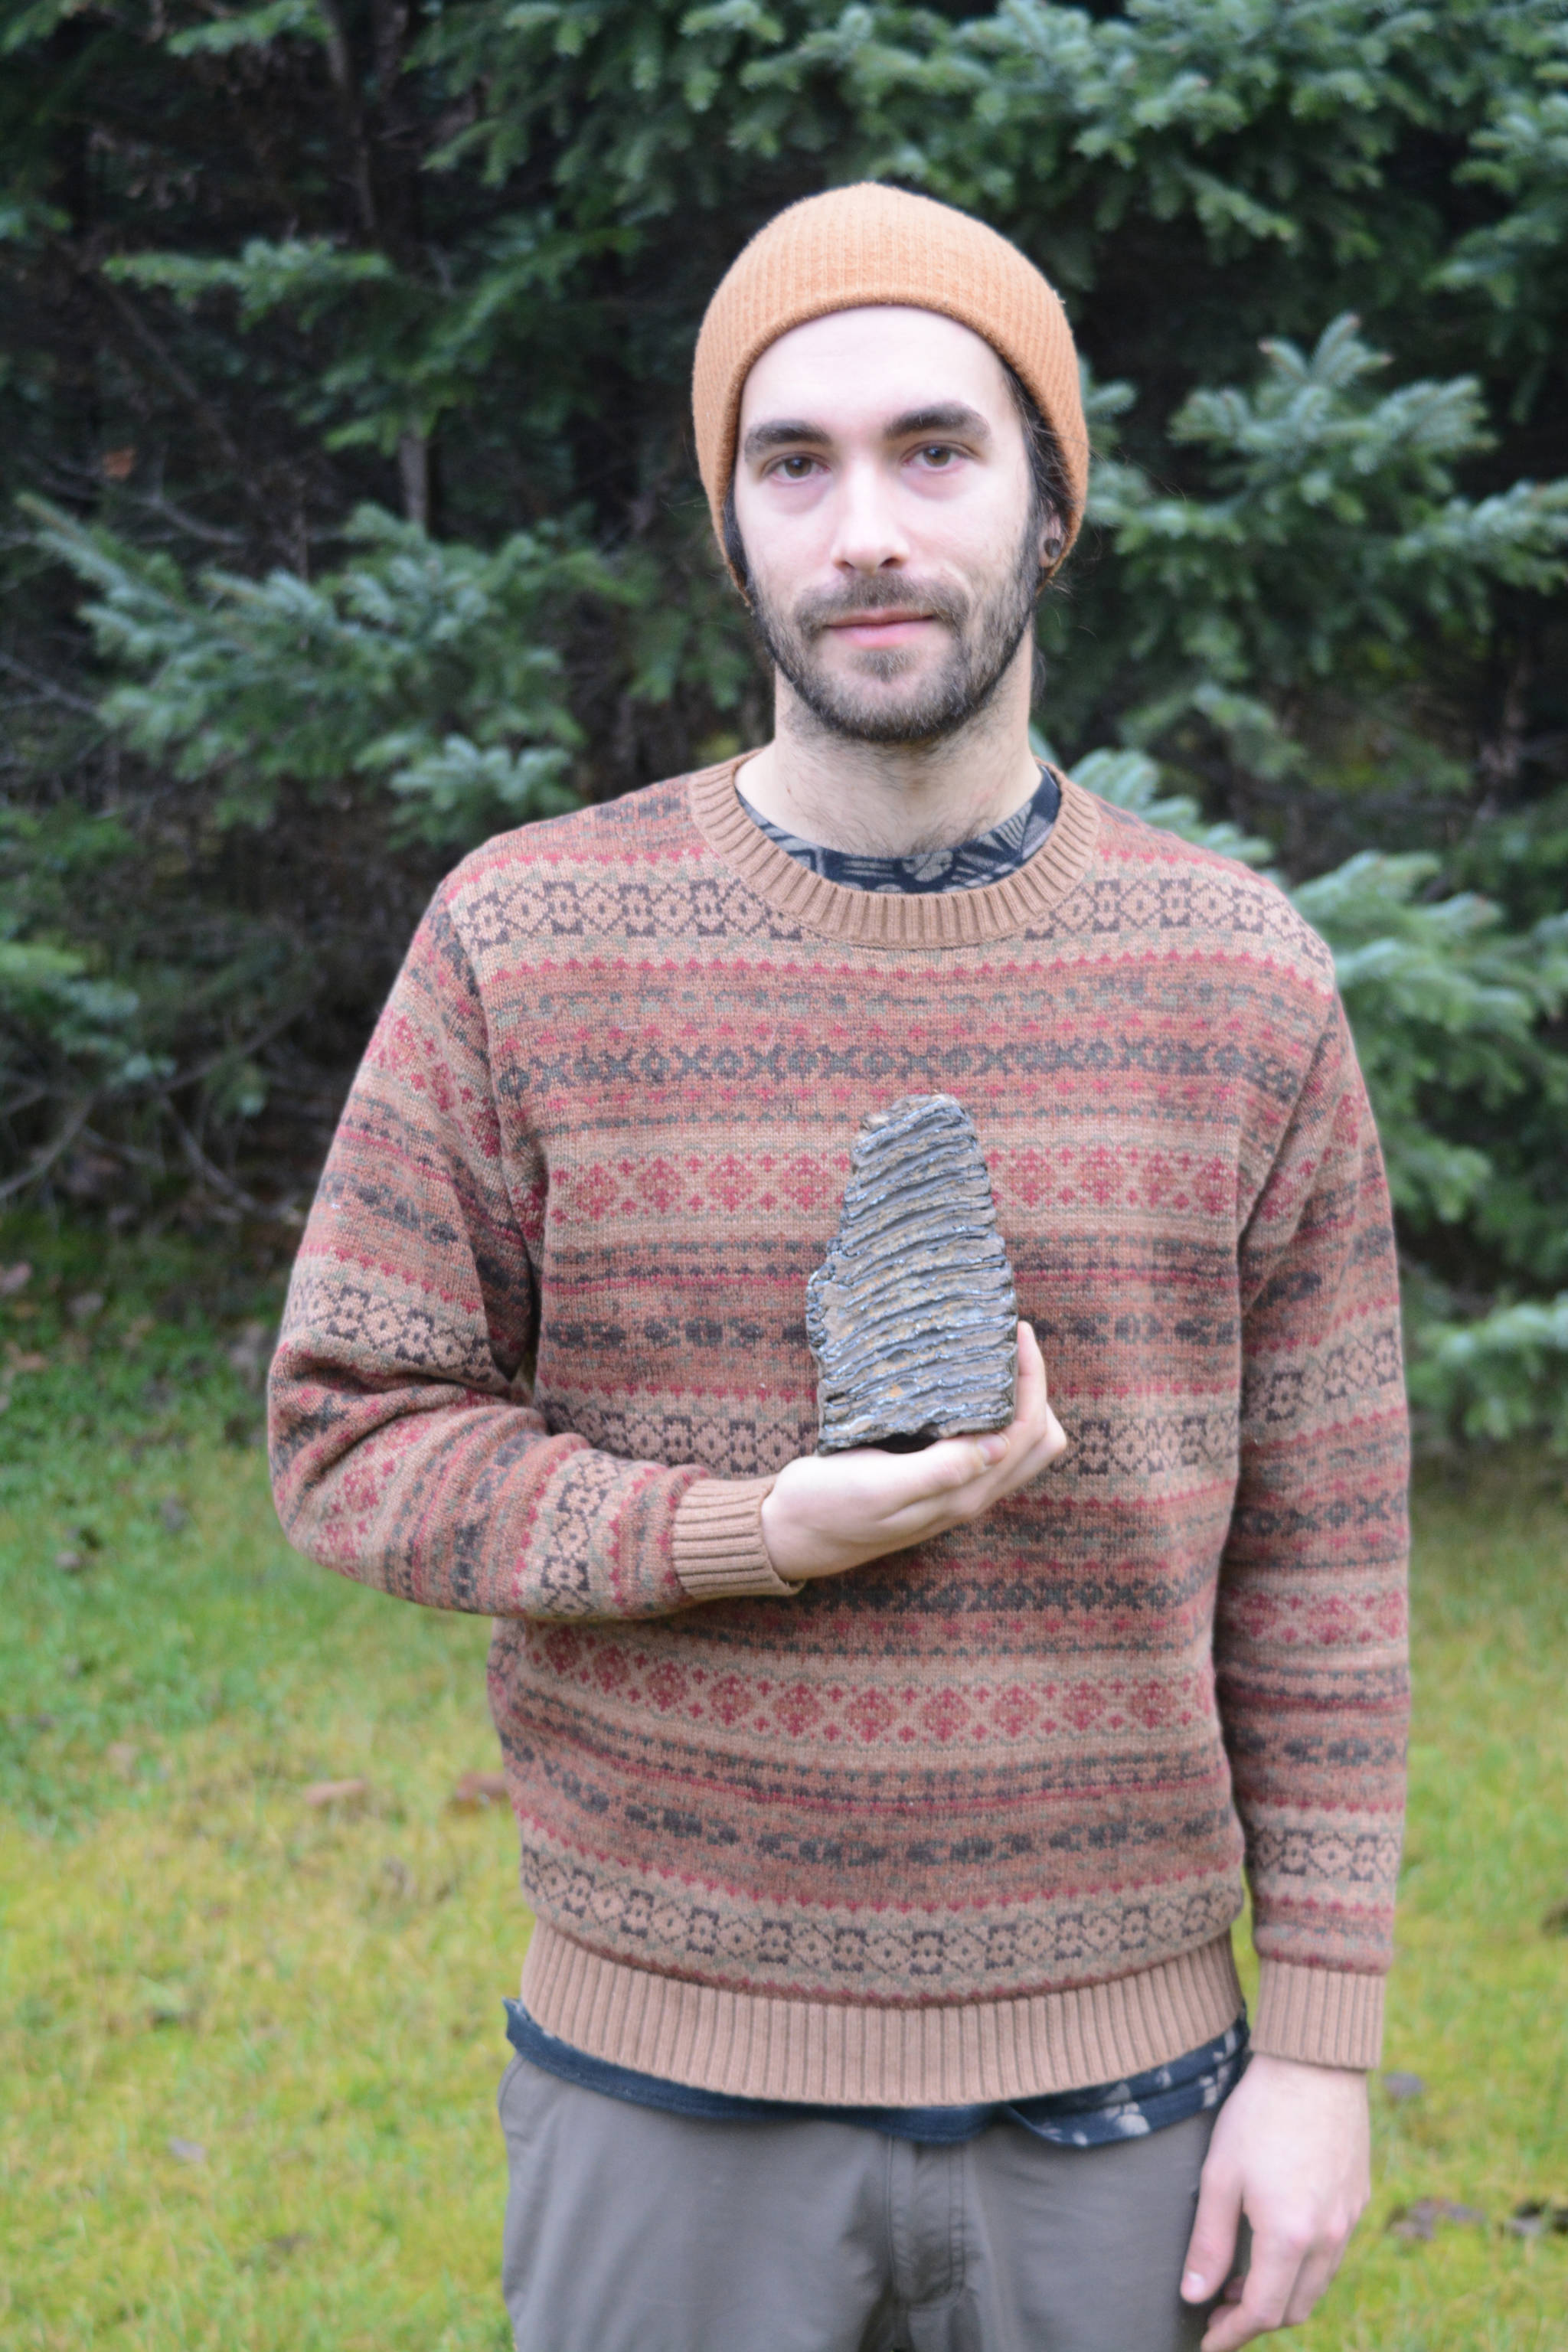 In a photo taken on Nov. 16, 2018, Aaron Carpenter holds a mammoth tooth he found on the beach north of Diamond Creek on Oct. 27, 2018, near Homer, Alaska. (Photo by Michael Armstrong/Homer News)